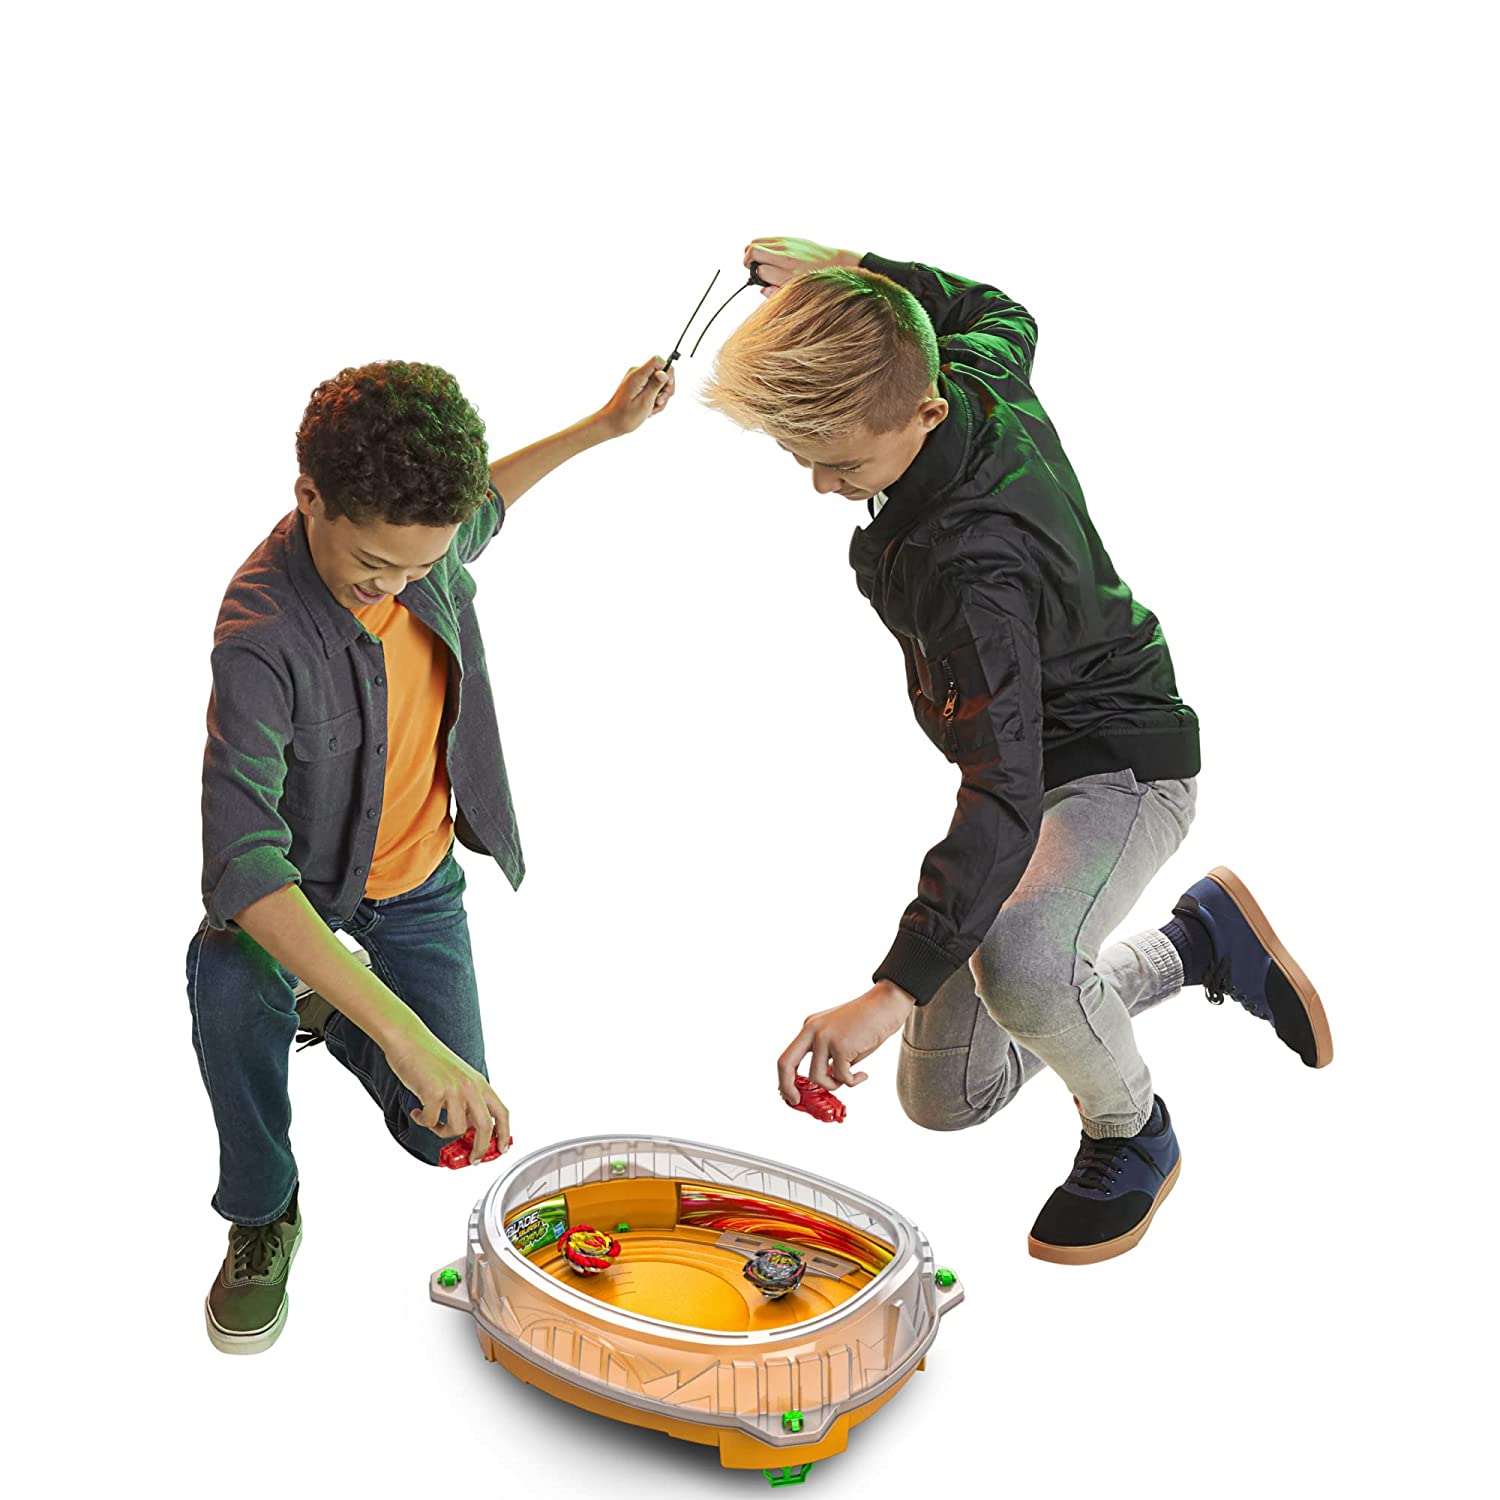 Beyblade Burst QuadDrive Cosmic Vector Battle Set with Beystadium, 2 Battling Top Toys and 2 Launchers for Ages 8 and Up